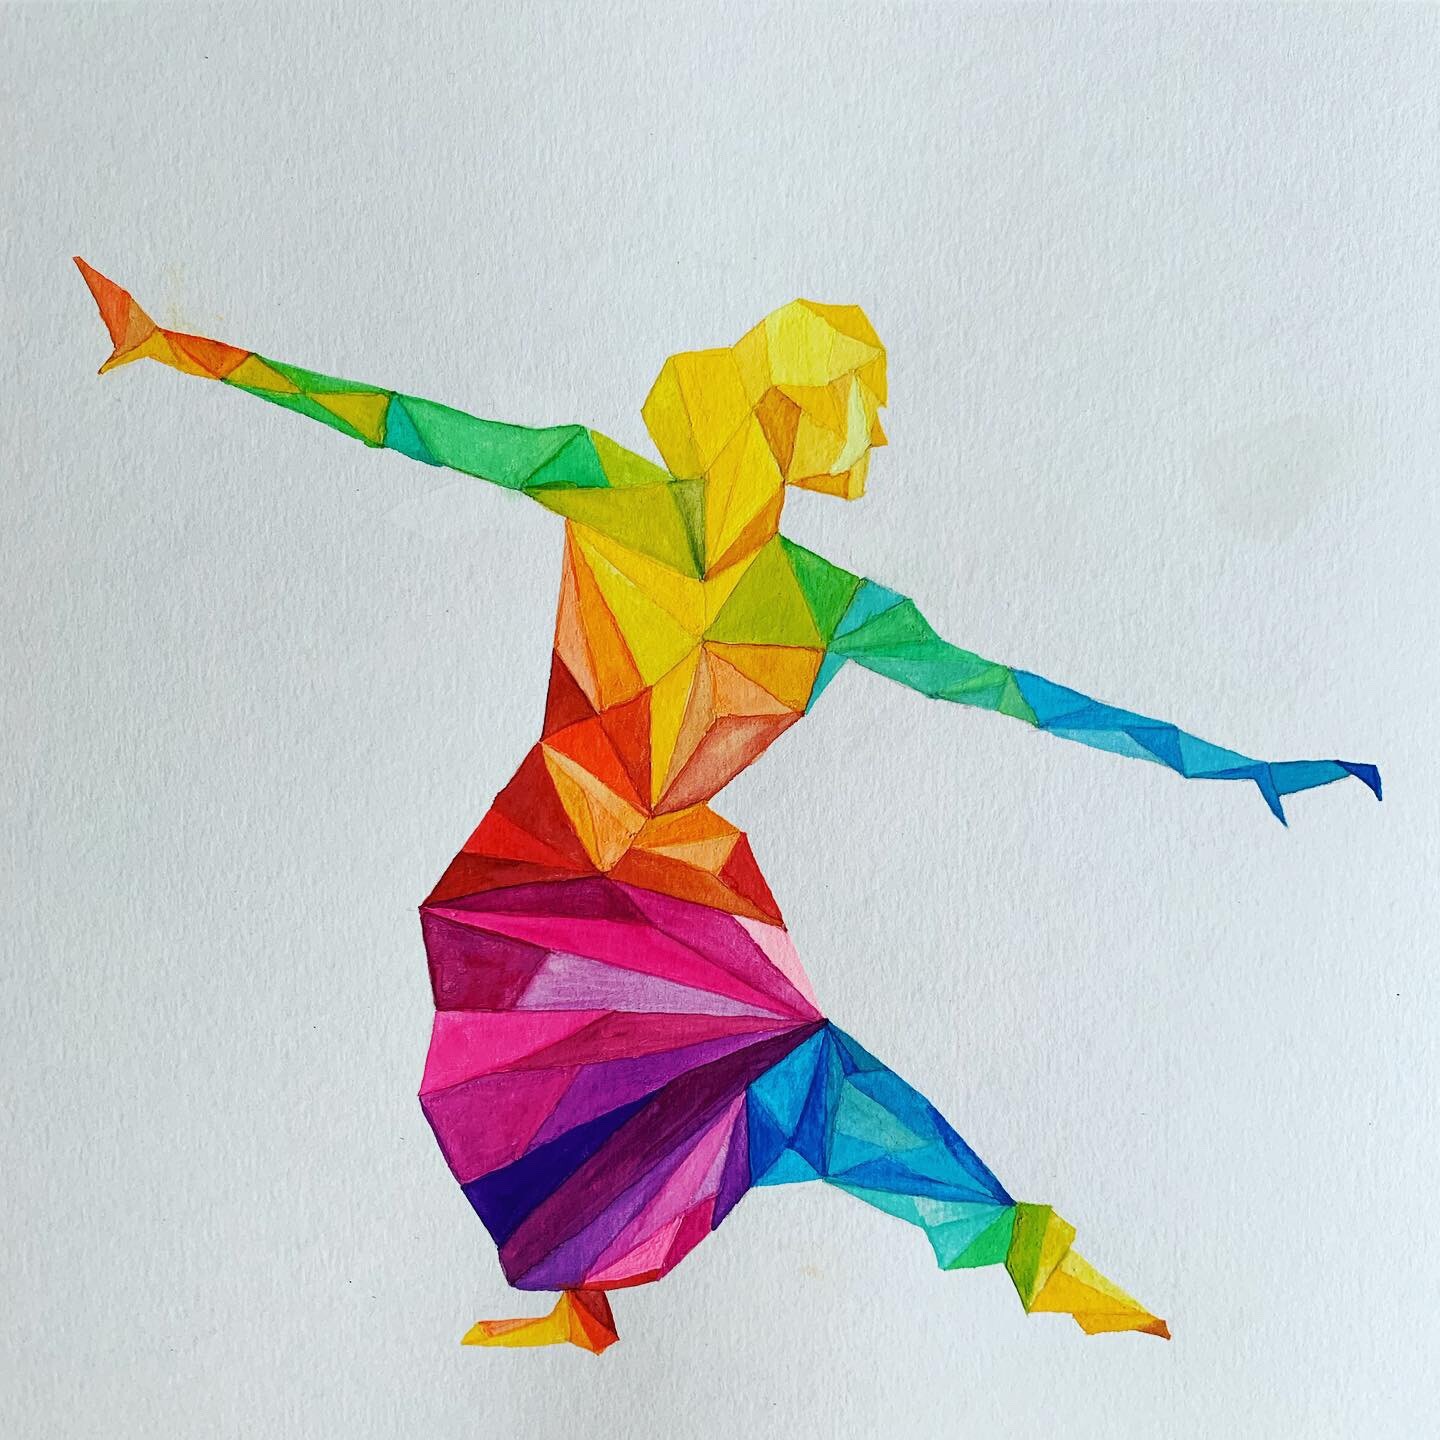 Free: Indian dancer Pose Silhouette - nohat.cc